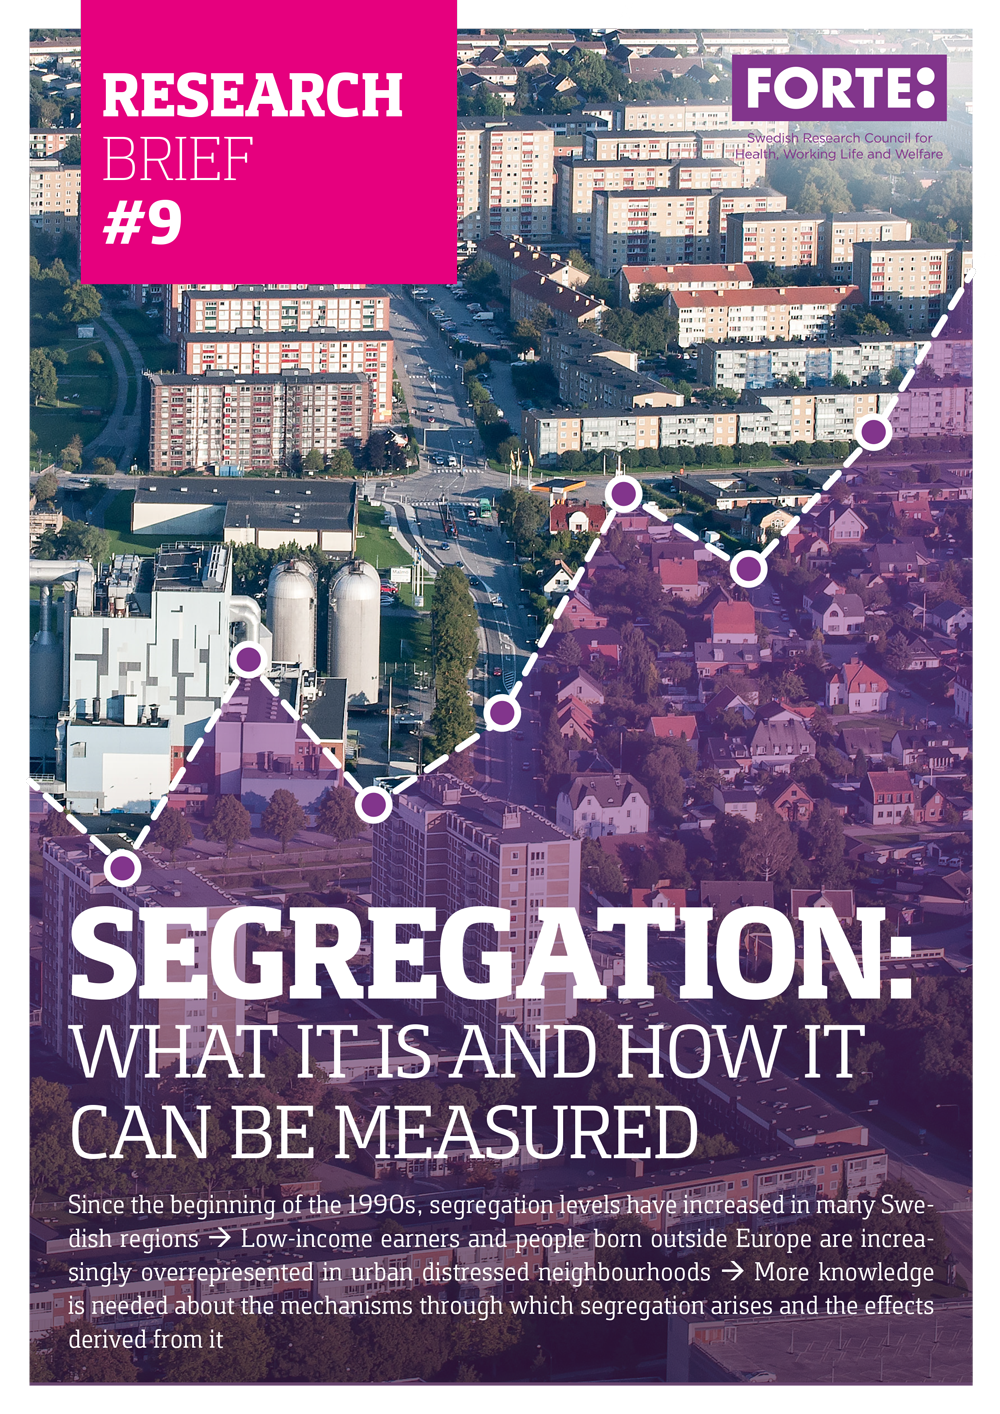 Research brief: Segregation – What it is and how it can be measured